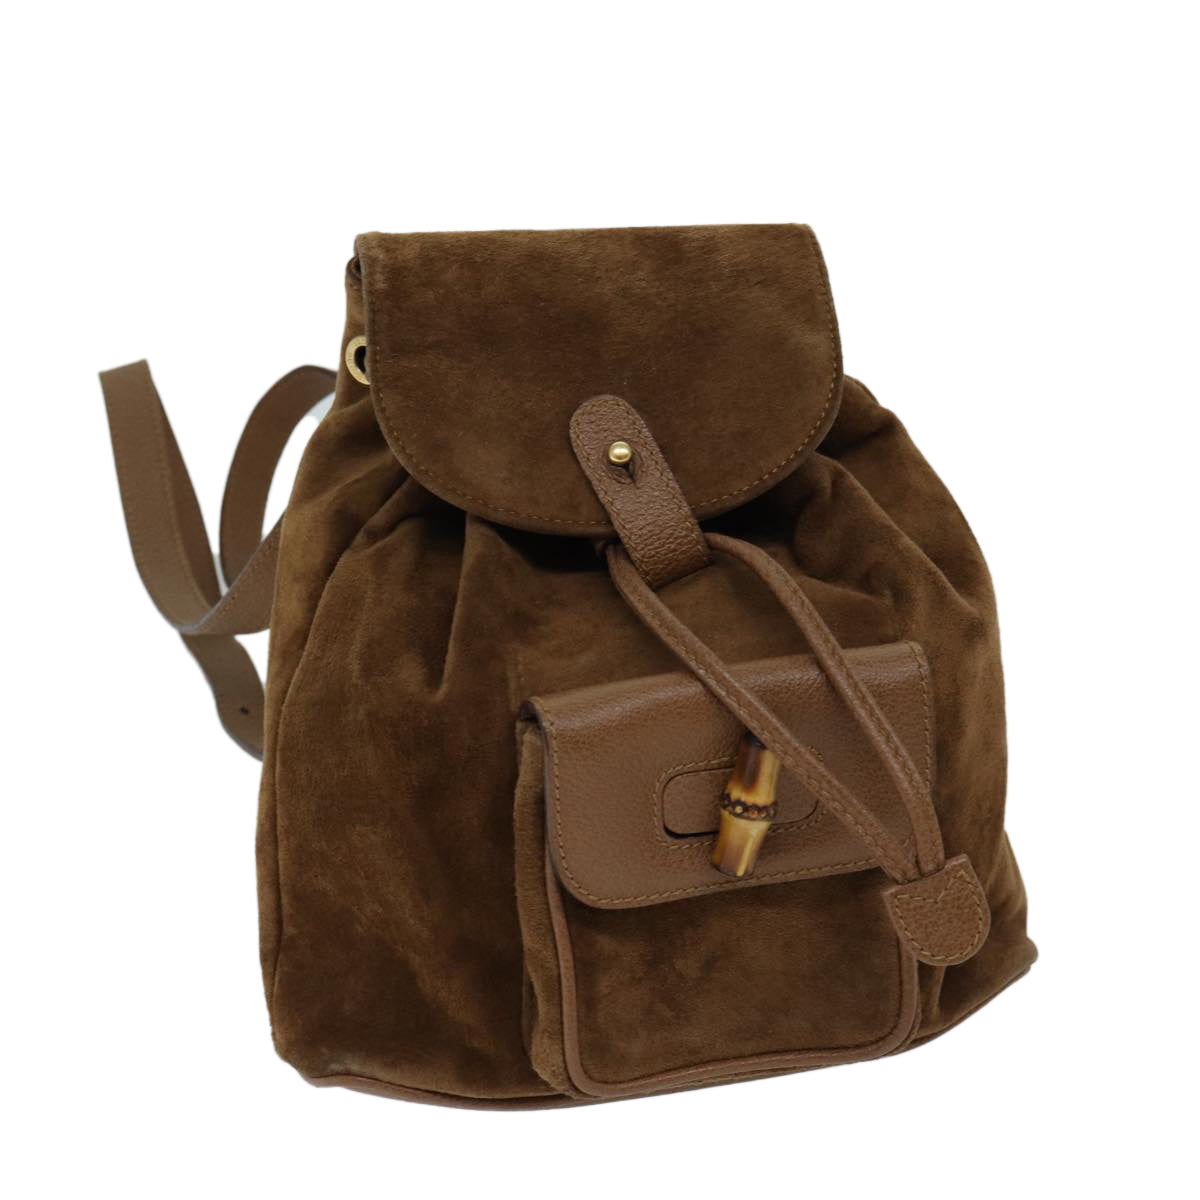 GUCCI Bamboo Backpack Suede Brown 003 2852 0030 0 Auth yk11526